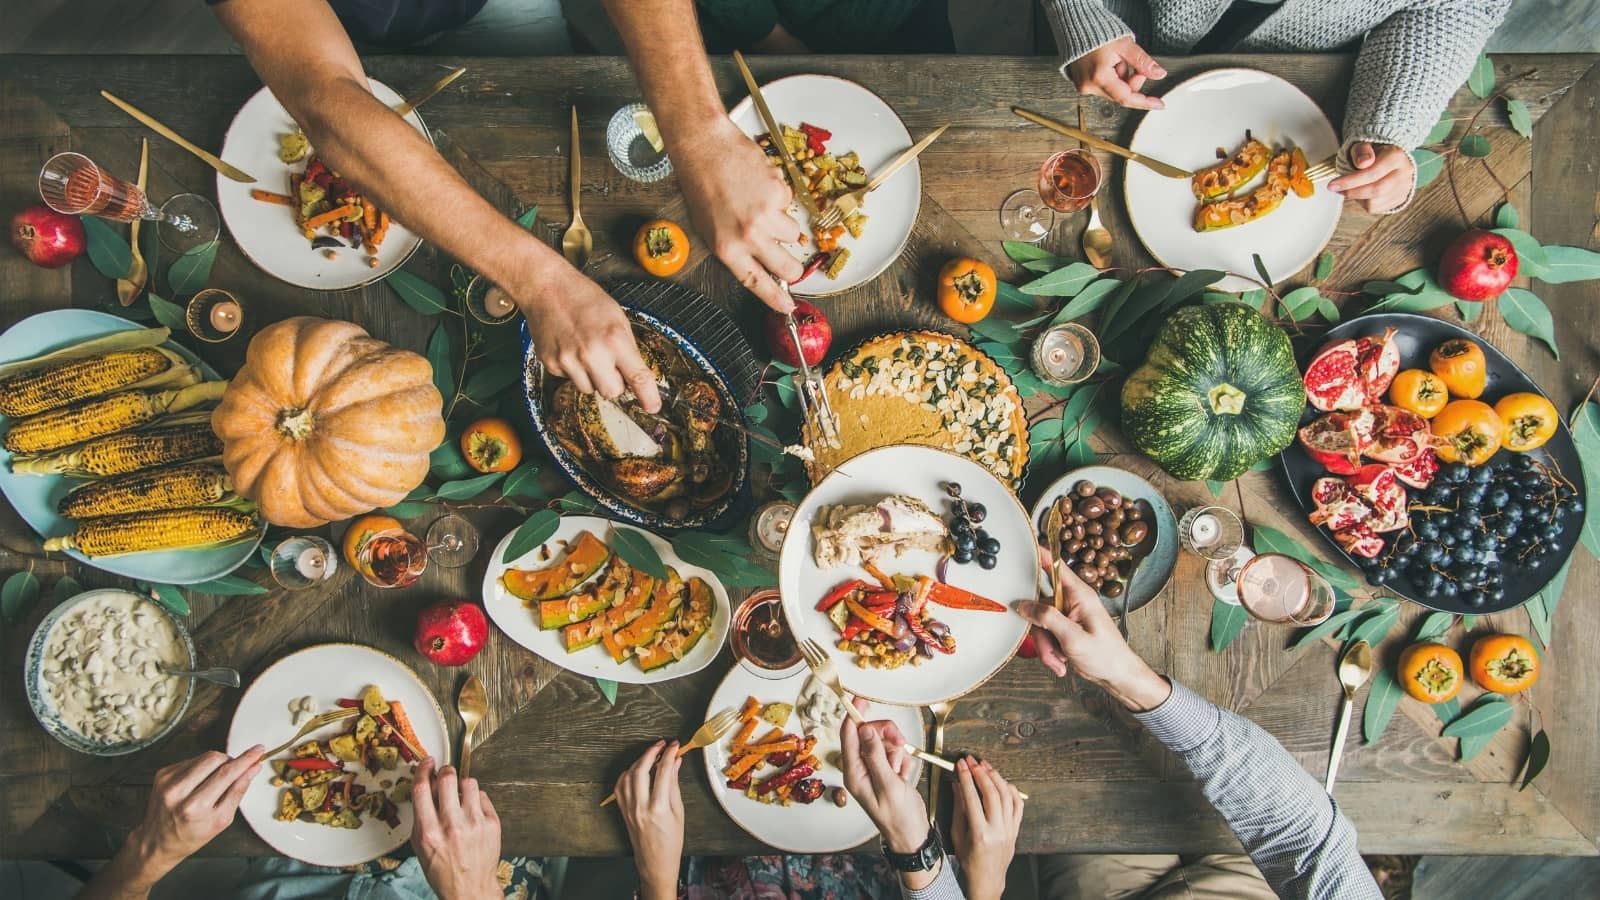 5 out of the box activities for a thanksgiving party